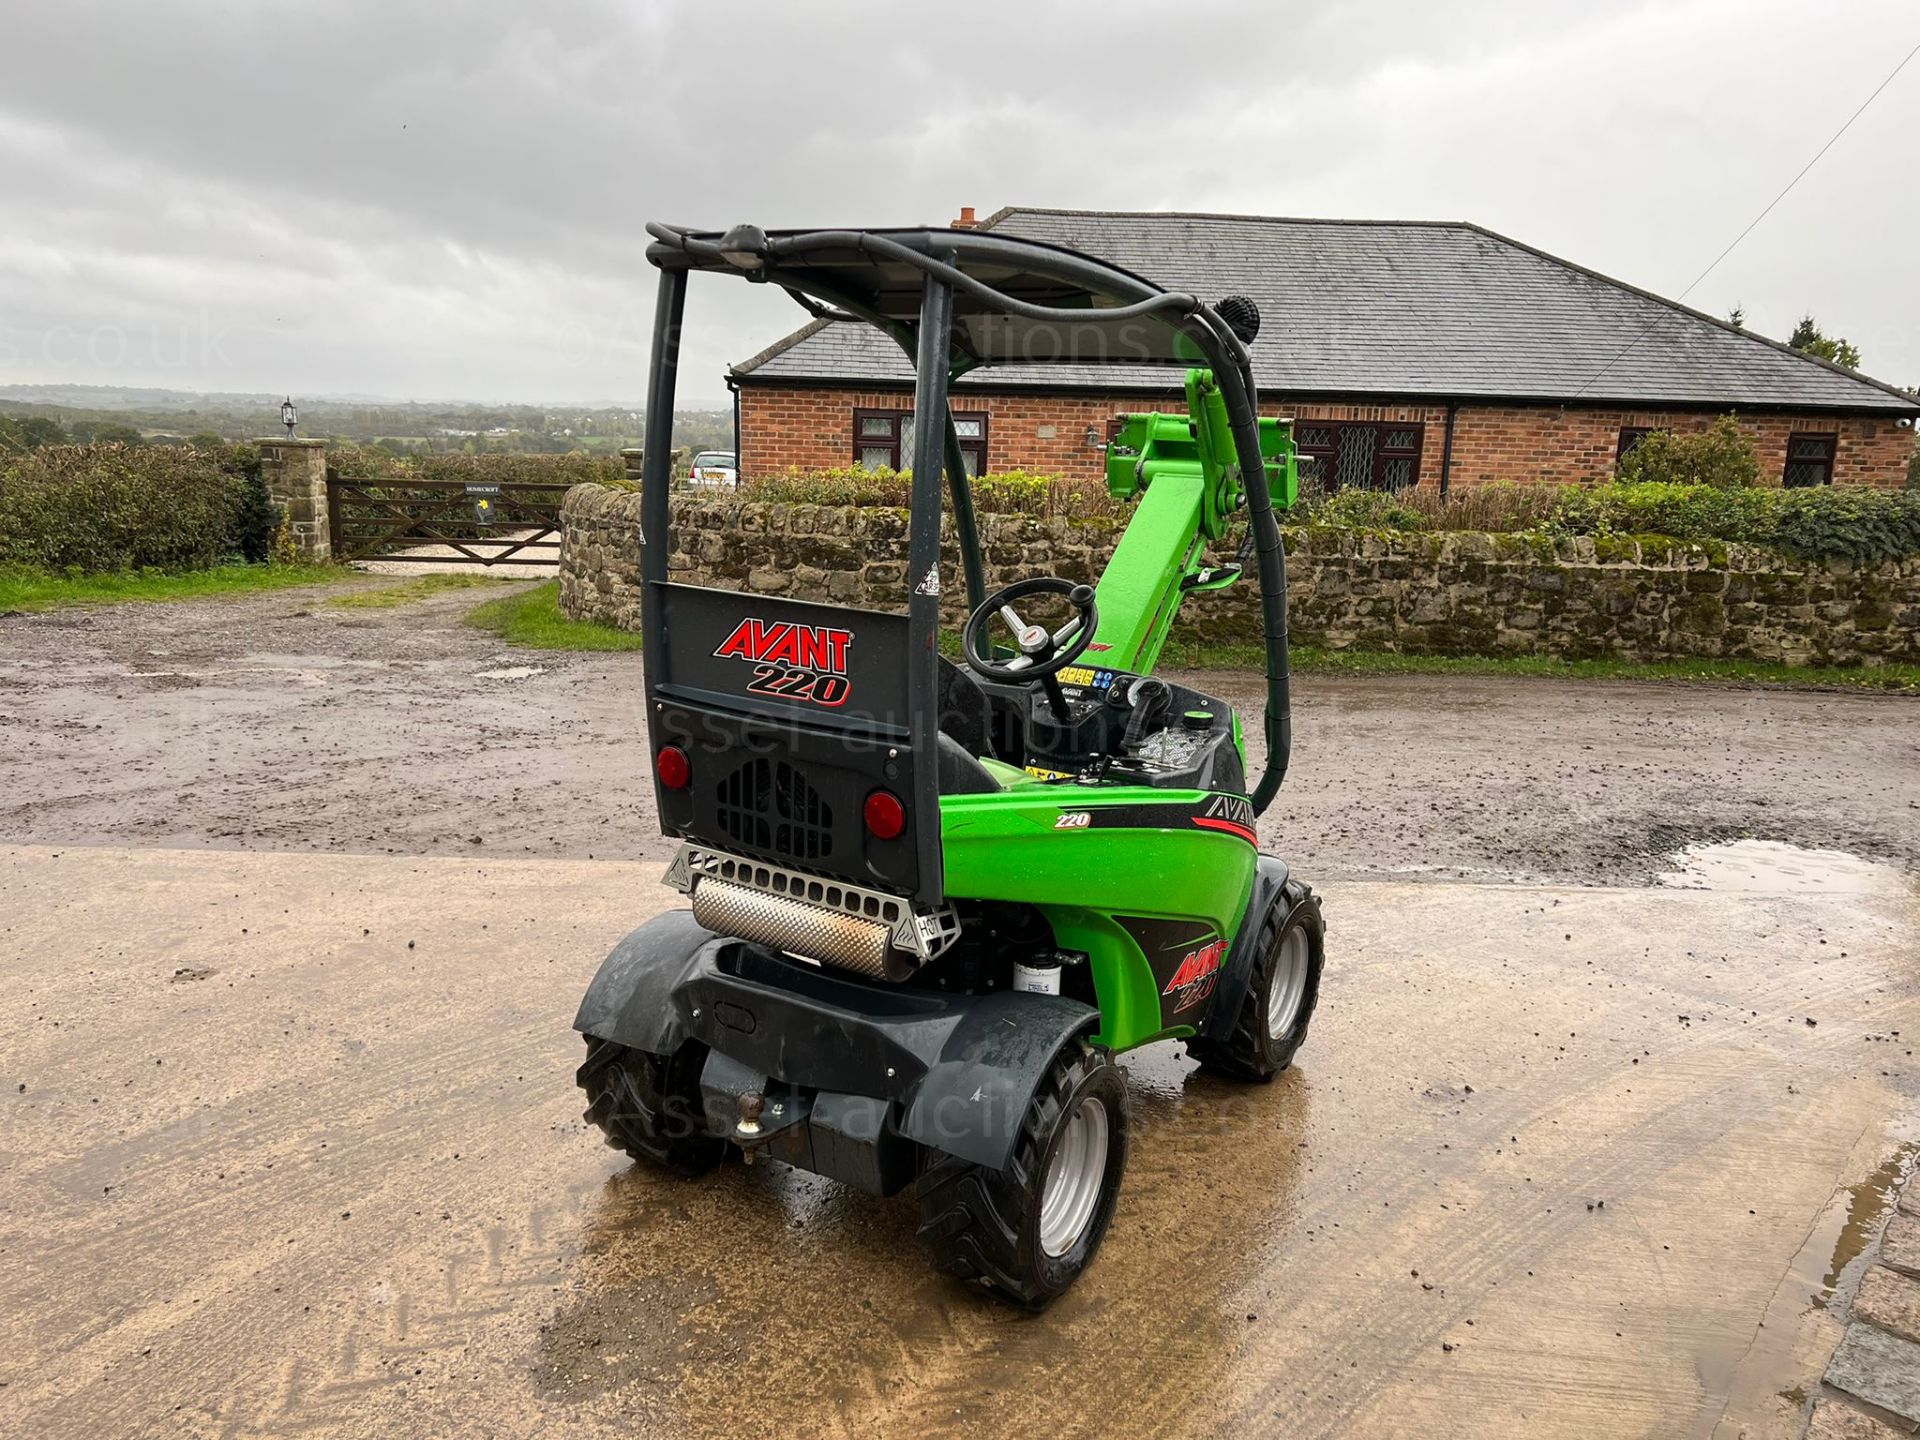 2018 AVANT 220 MULTI-FUNCTIONAL LOADER, RUNS DRIVES AND LIFTS, SHOWING A LOW 379 HOURS *PLUS VAT* - Image 6 of 14